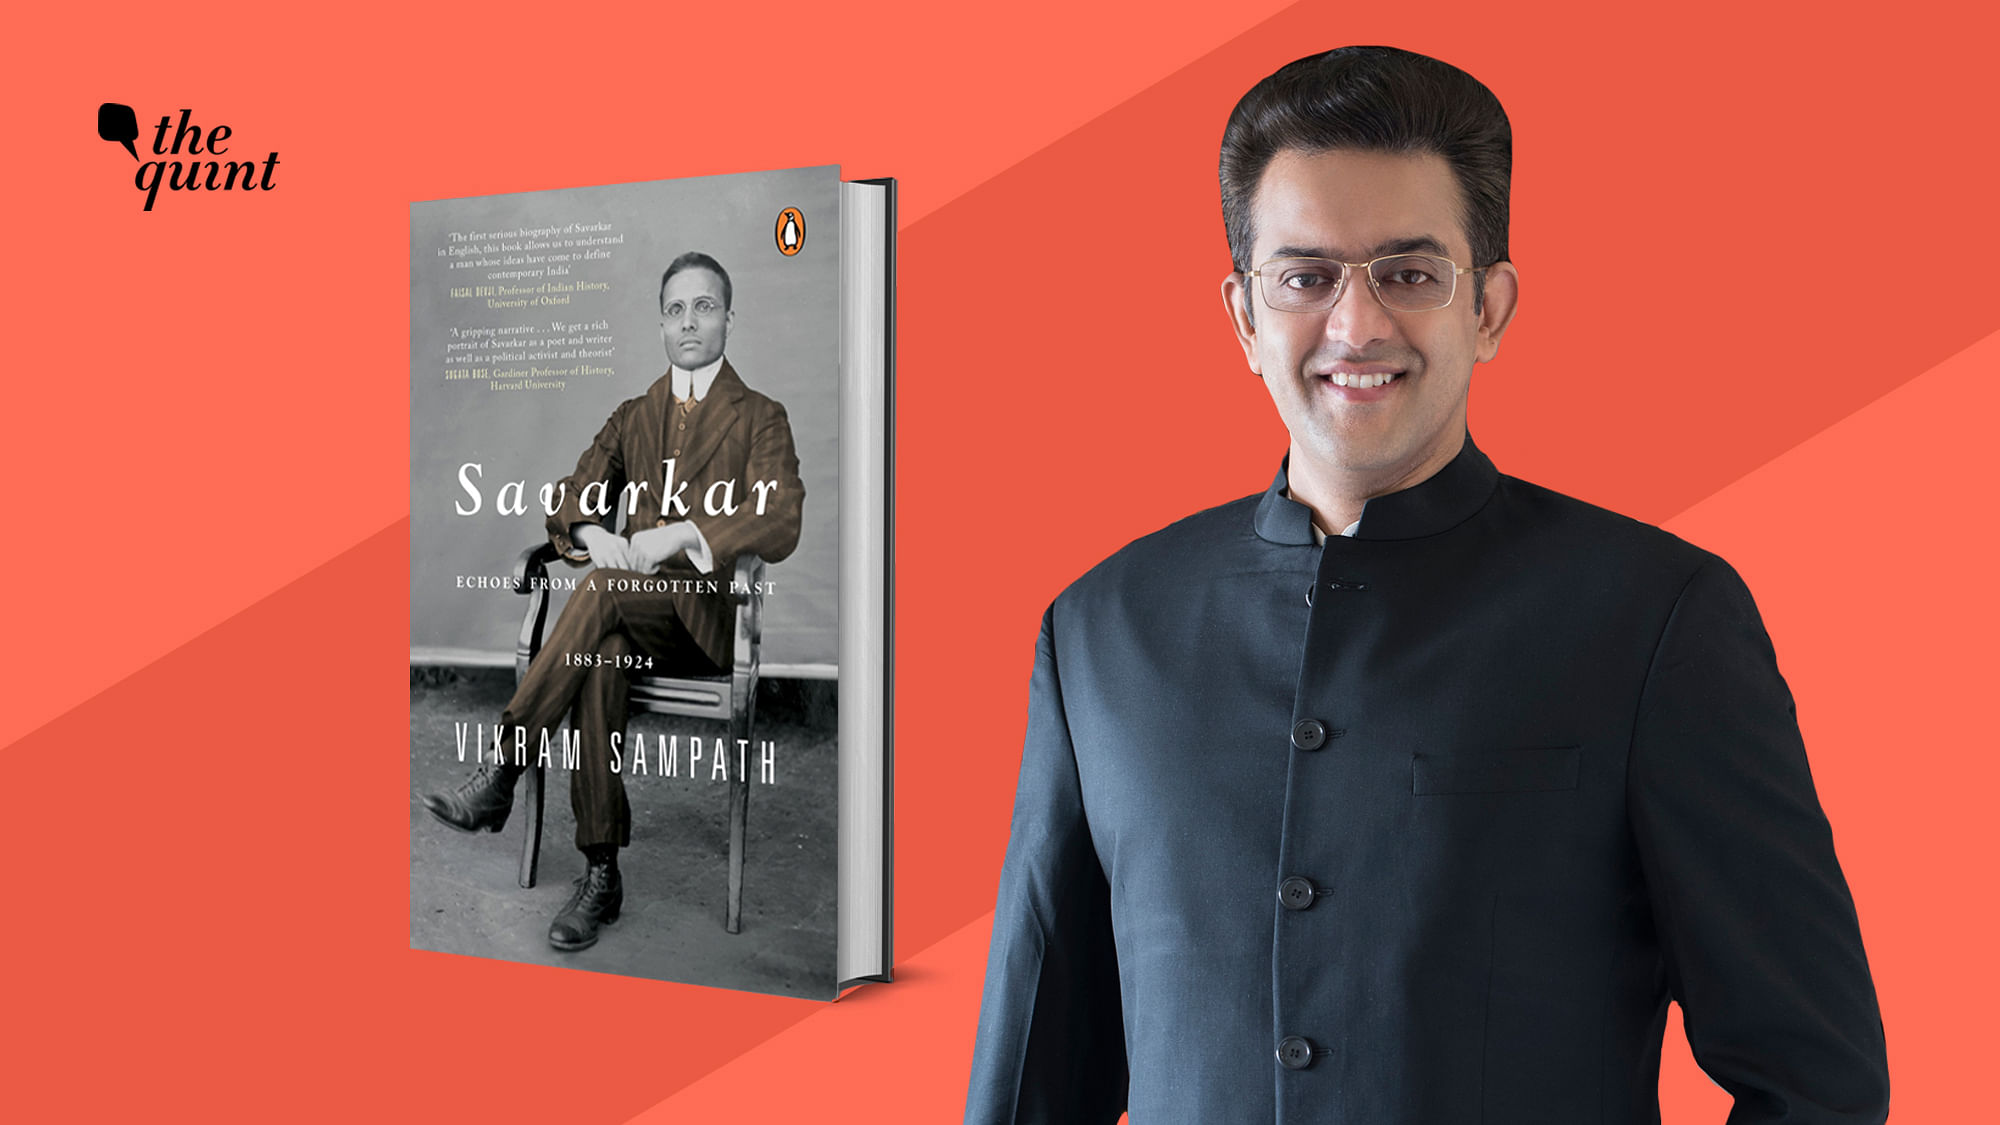 Image of the author of the latest book on Savarkar, Vikram Sampath, and the book cover, used for representational purposes.